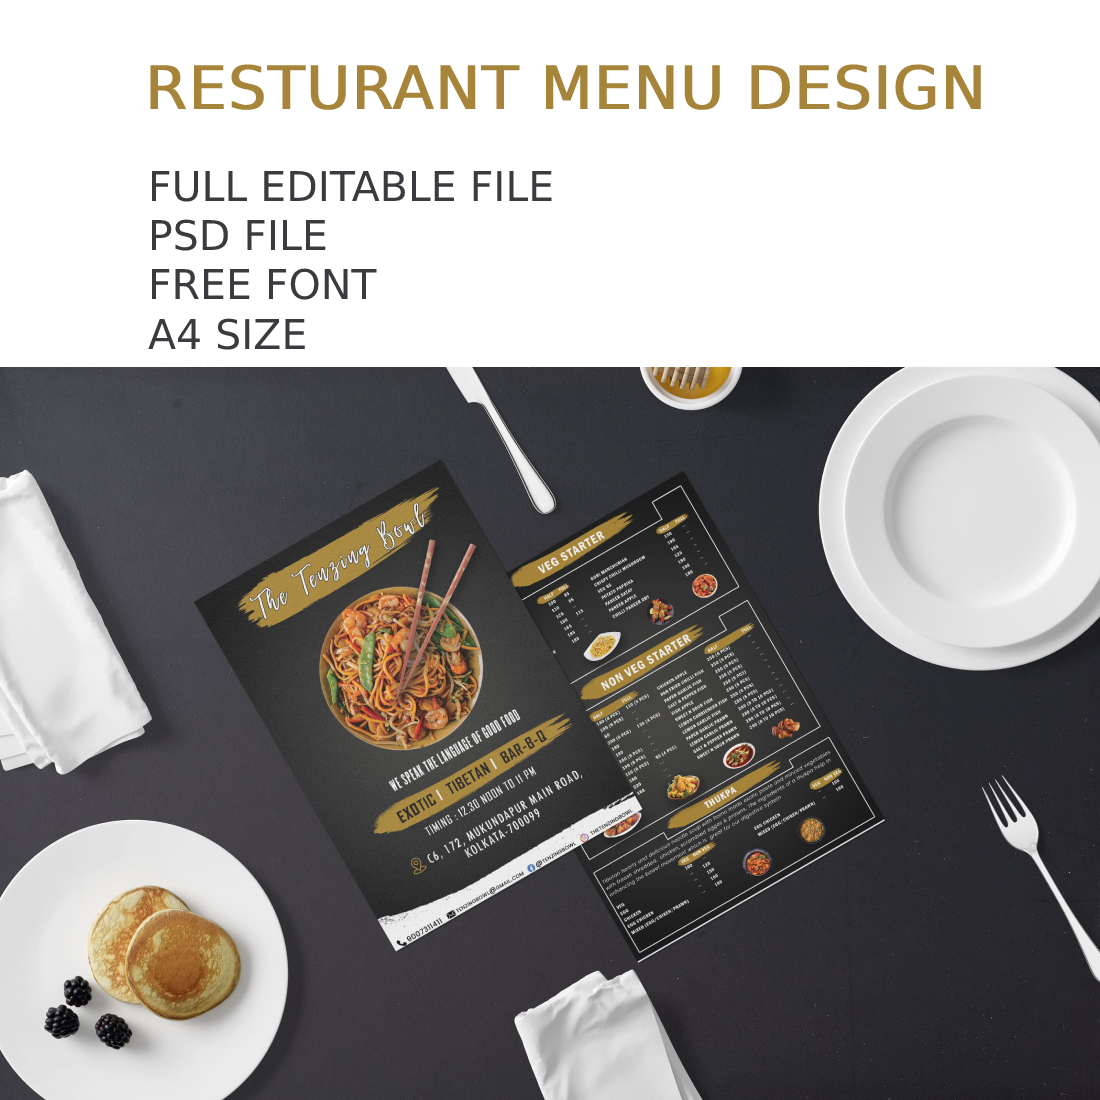 Restaurant menu is shown on a table.